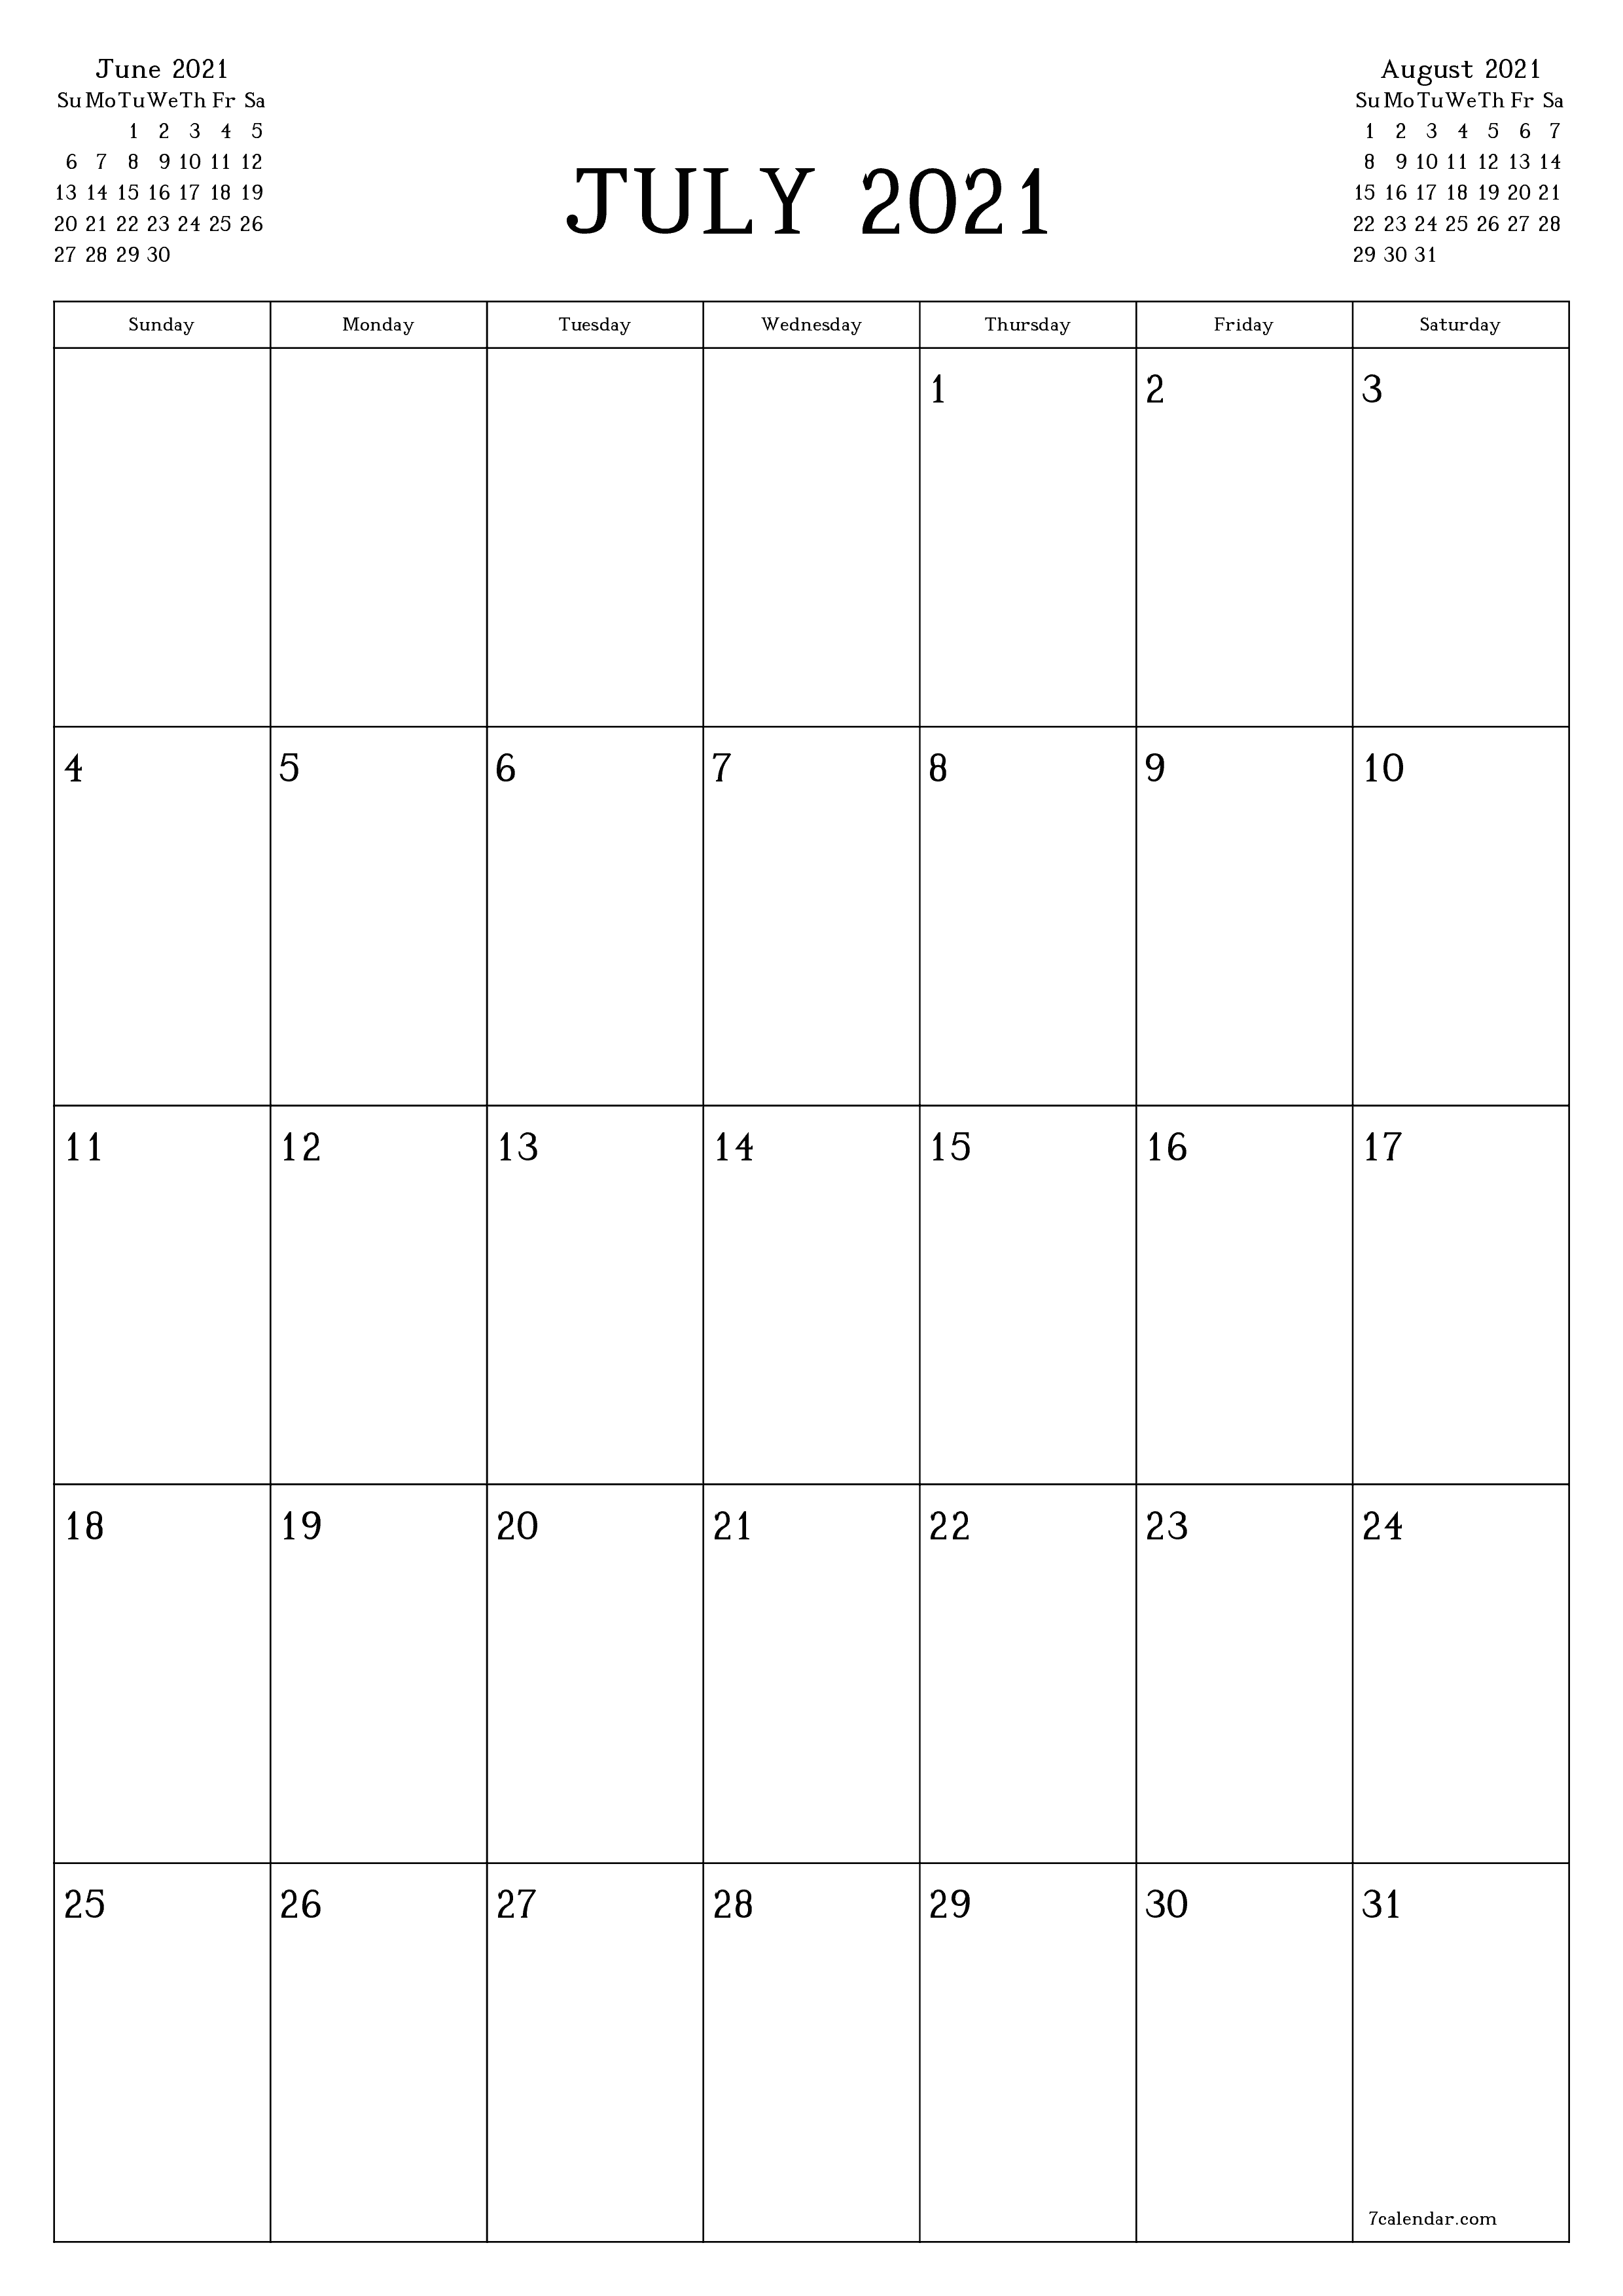 Blank monthly calendar planner for month July 2021 with notes save and print to PDF PNG English - 7calendar.com